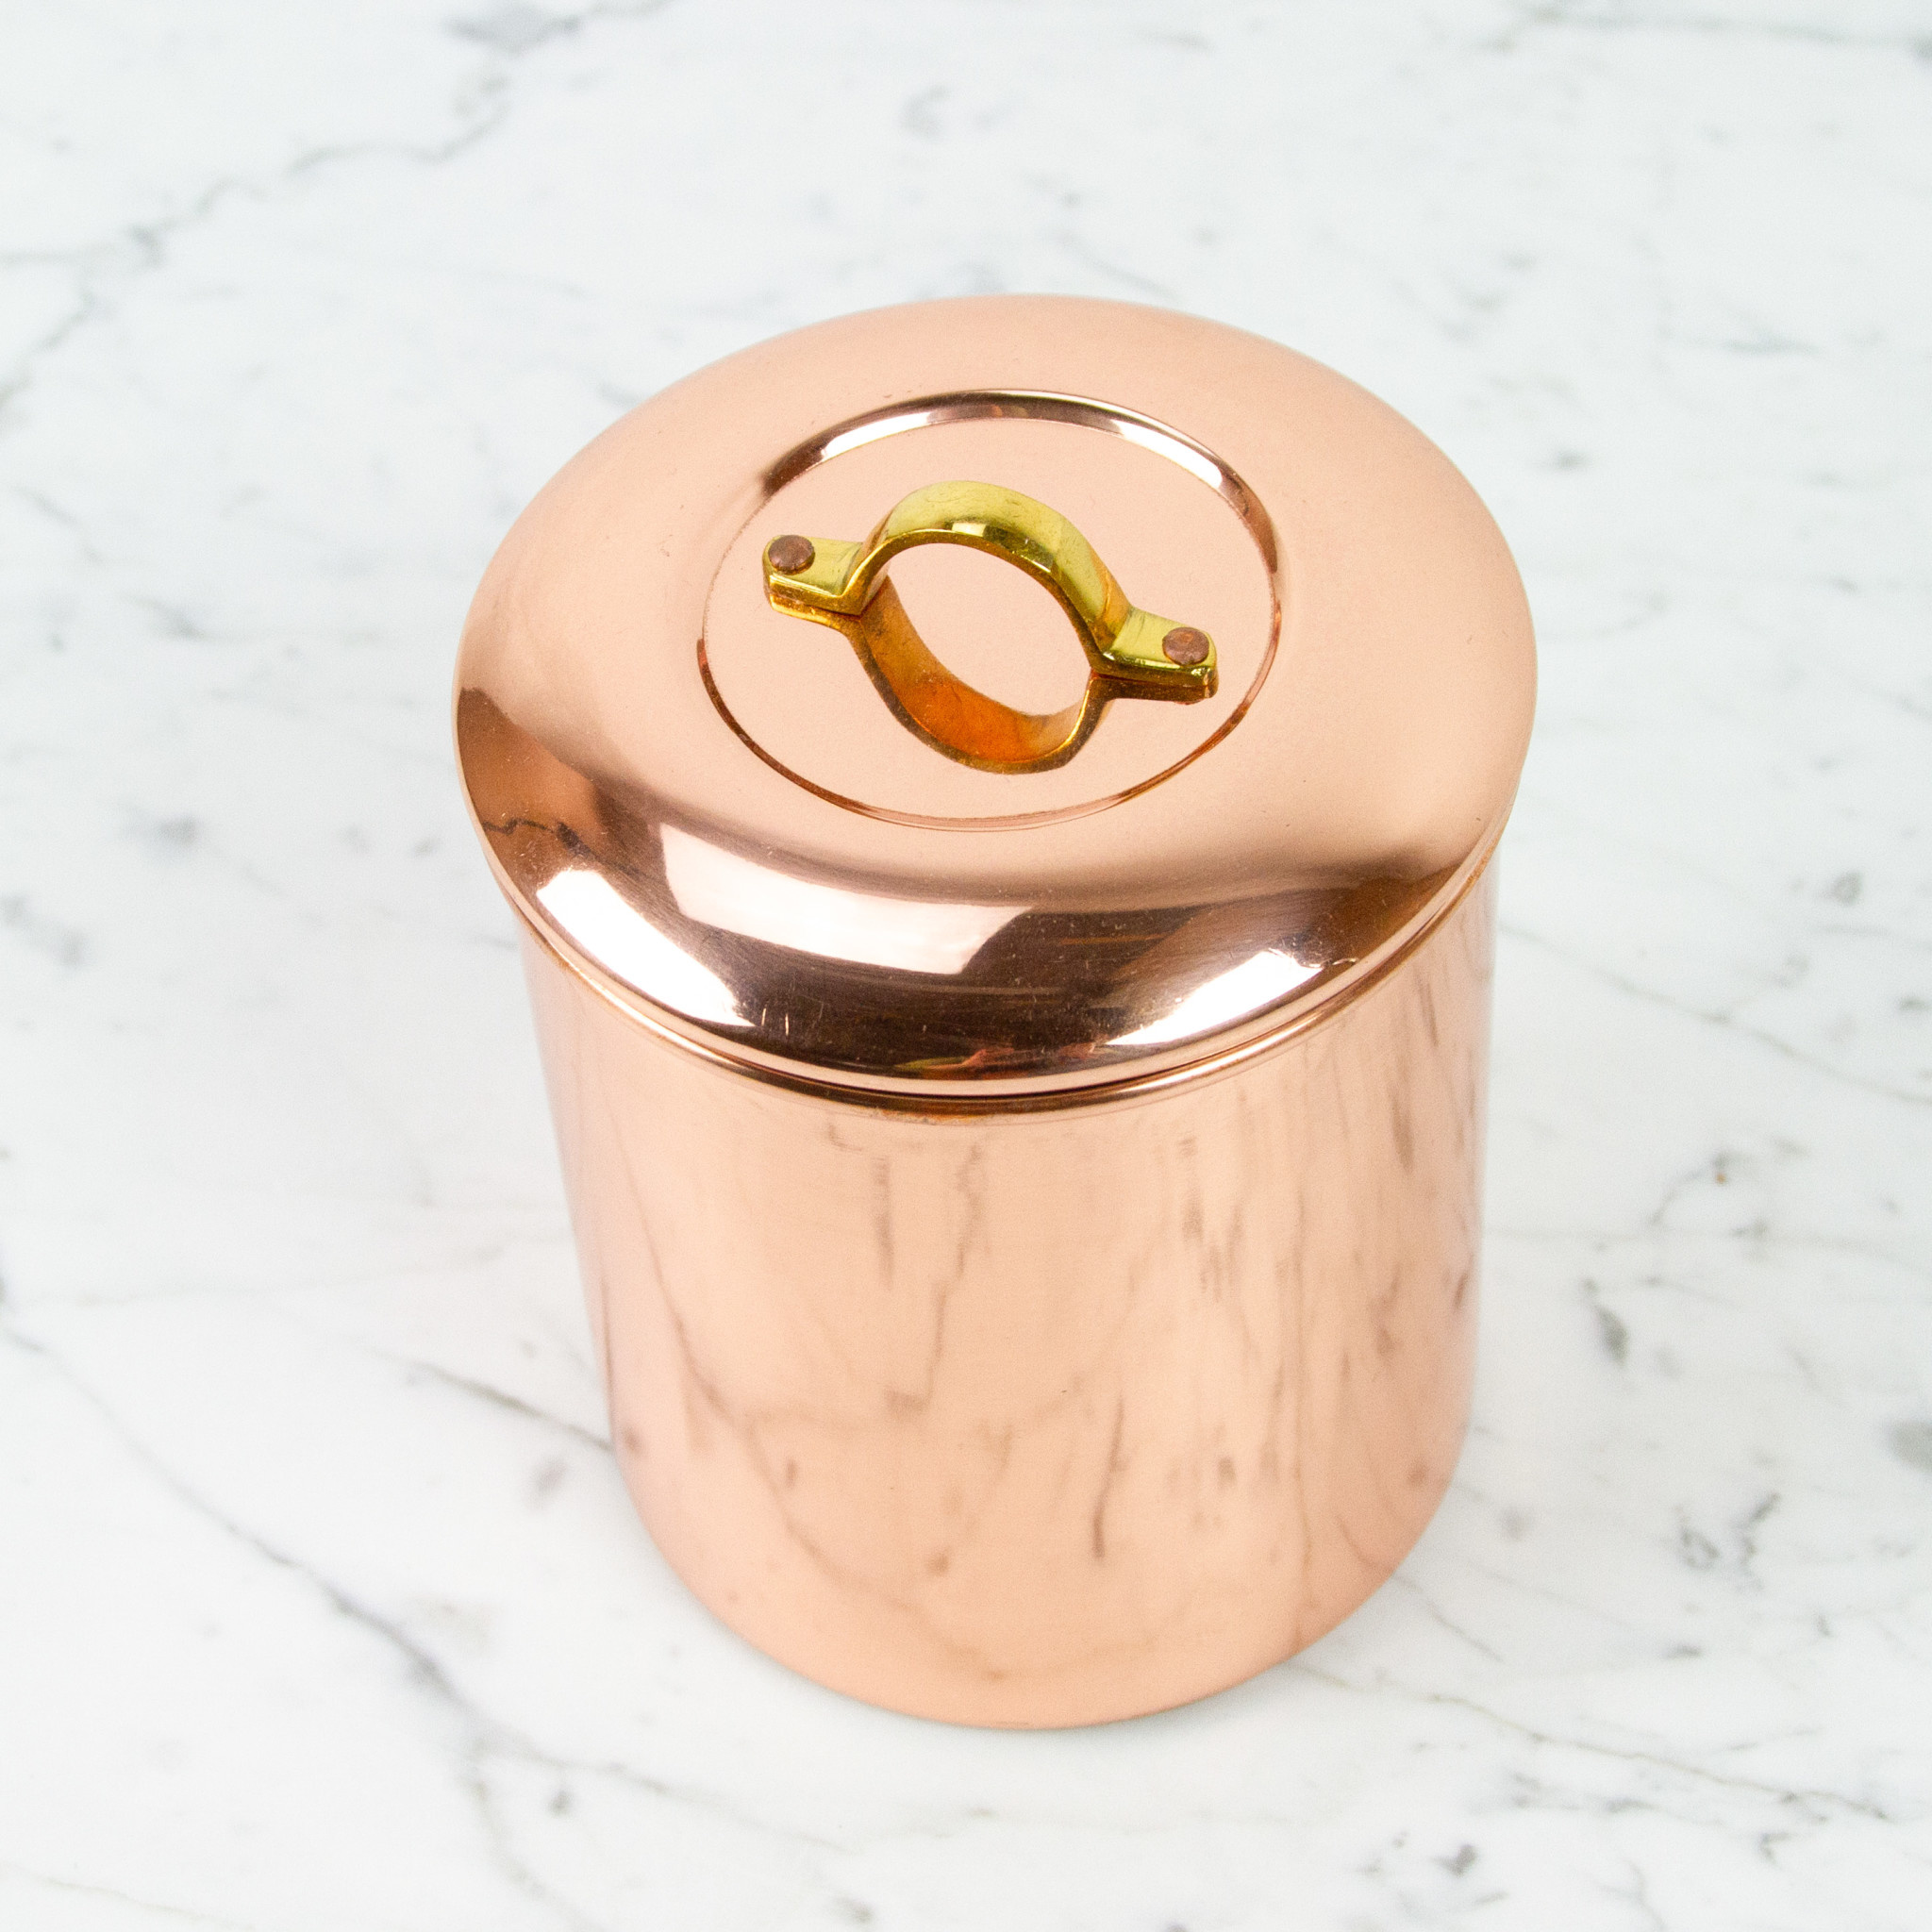 Copper Storage Canister Brass Handle - 1.5qt - Small - 5.5"